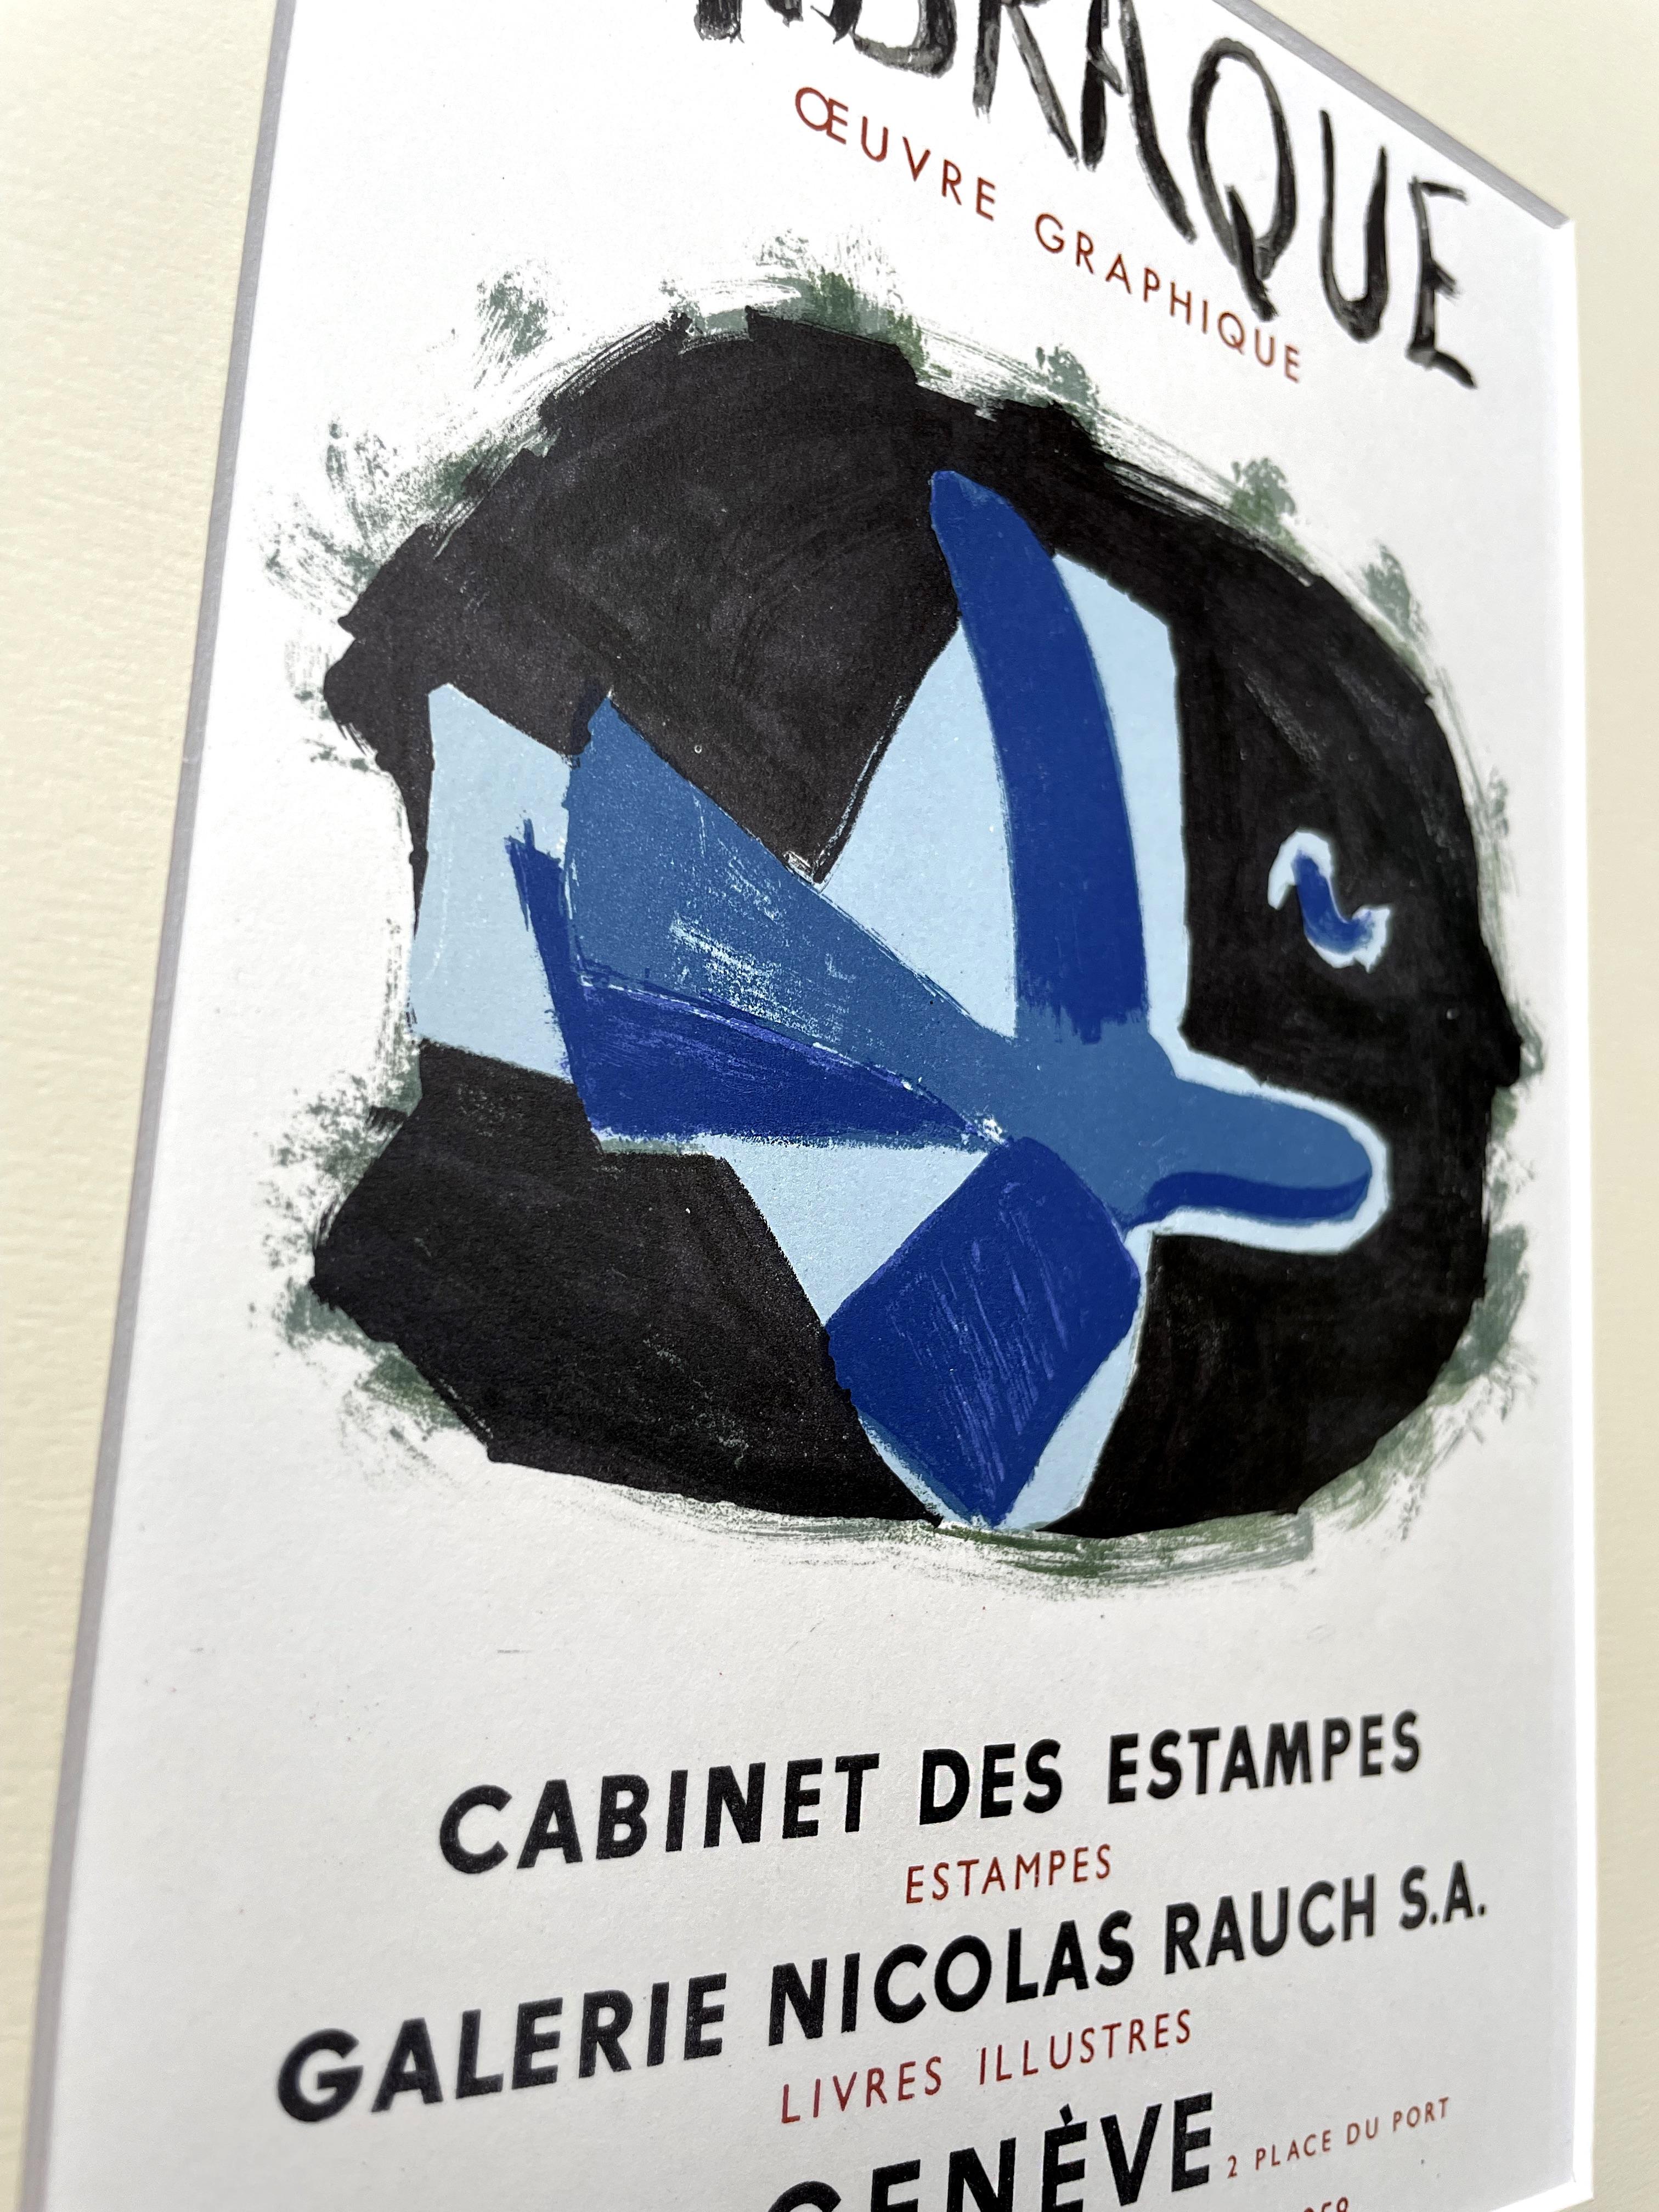 Graphic Artwork Exhibition Poster by Georges Braque, Modernist Lithograph 1959 - Print by (after) Georges Braque